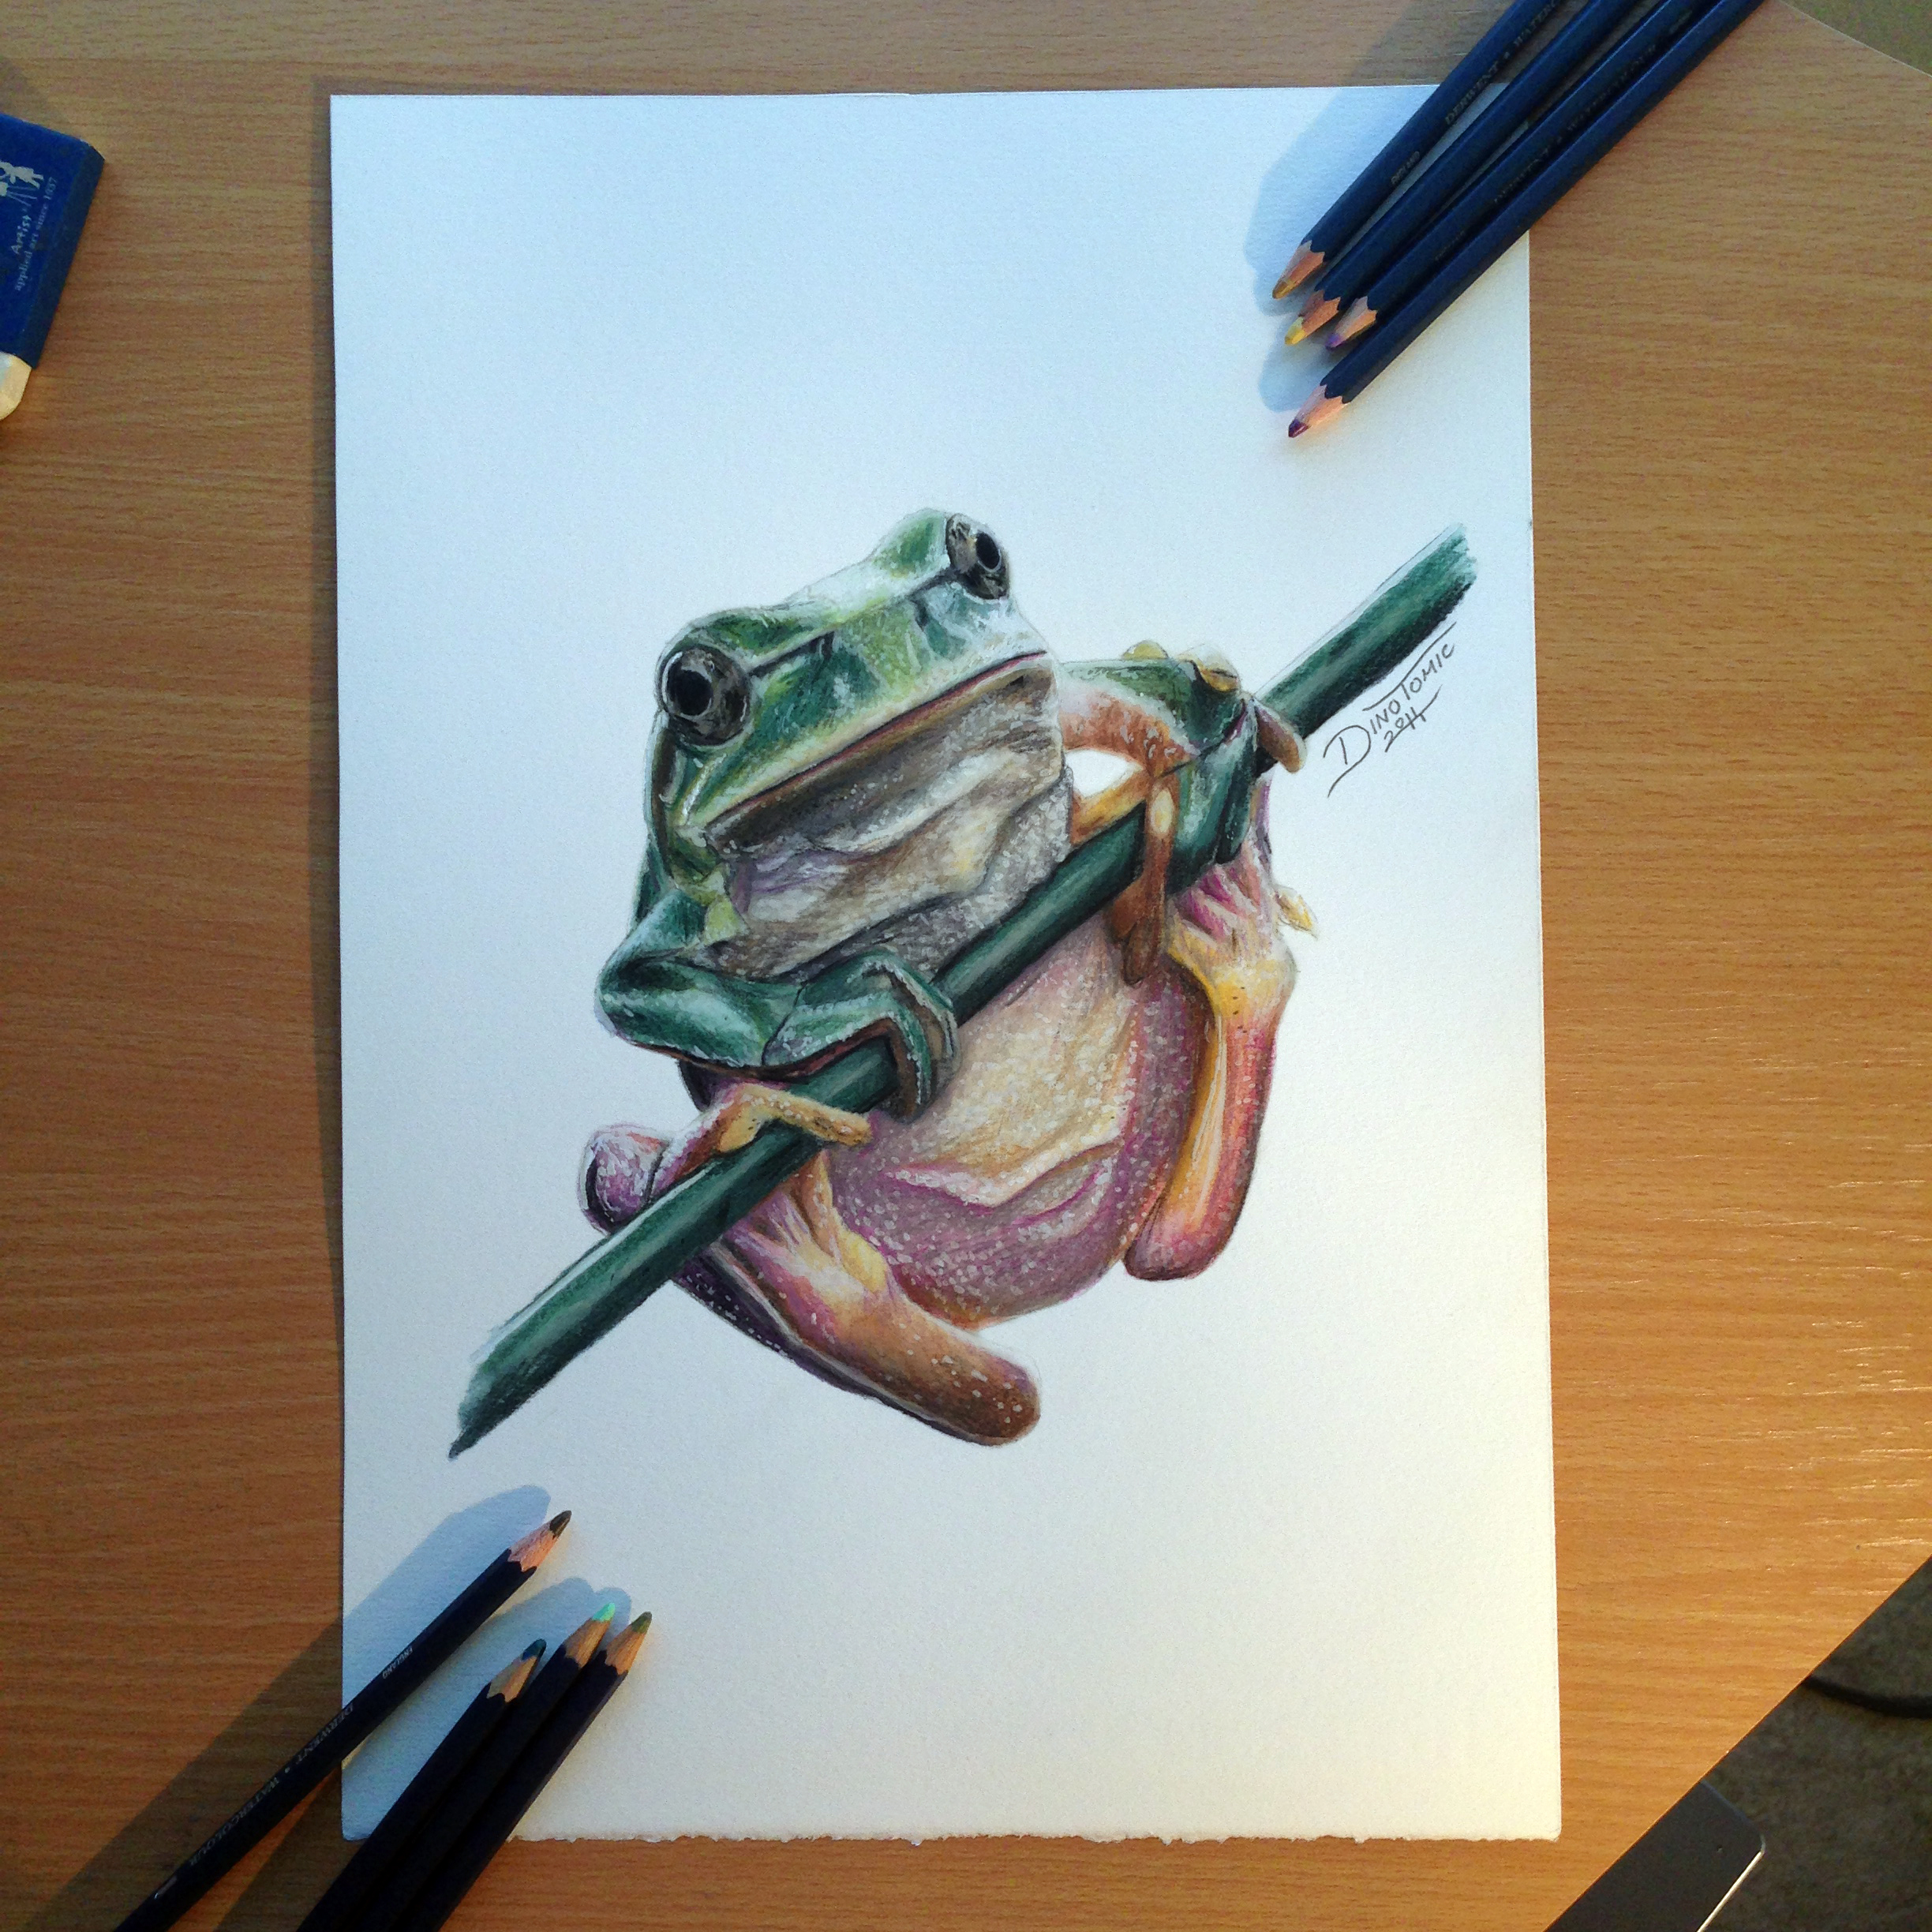 Frog Color Pencil Drawing